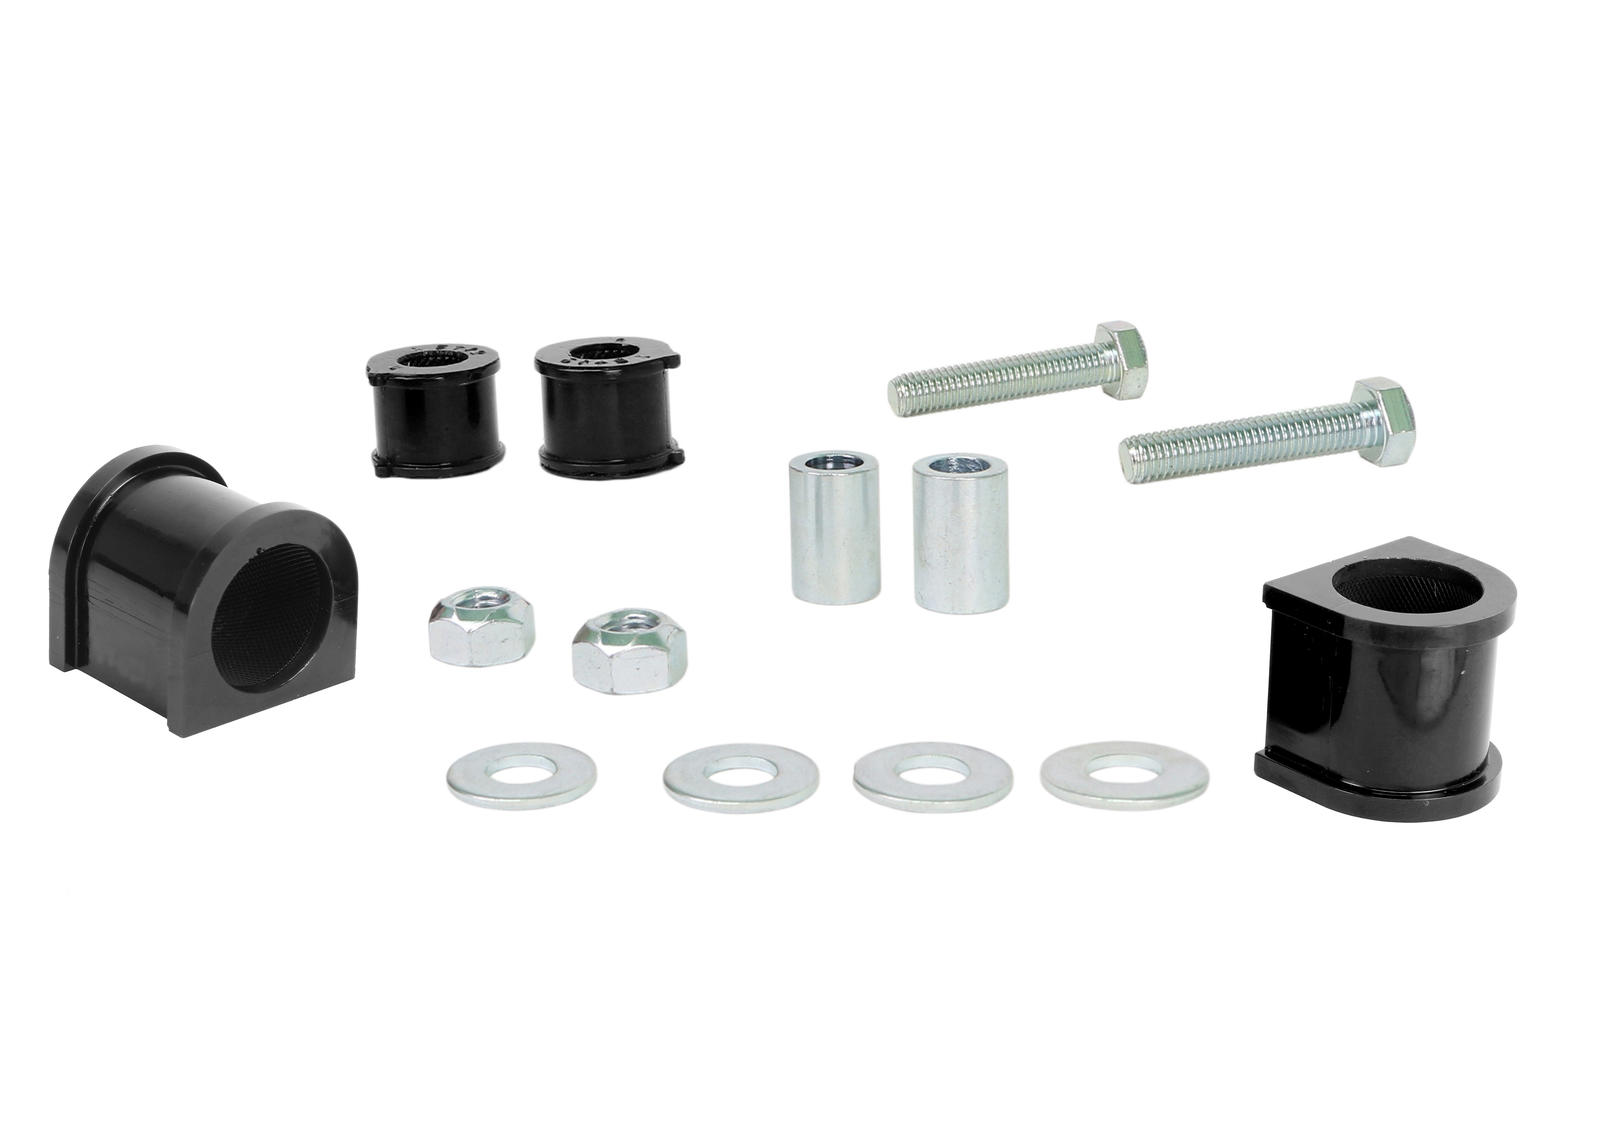 Front Sway Bar Mount and Link - Bushing Kit 31mm to Suit Toyota Land Cruiser 76, 78 and 79 Series